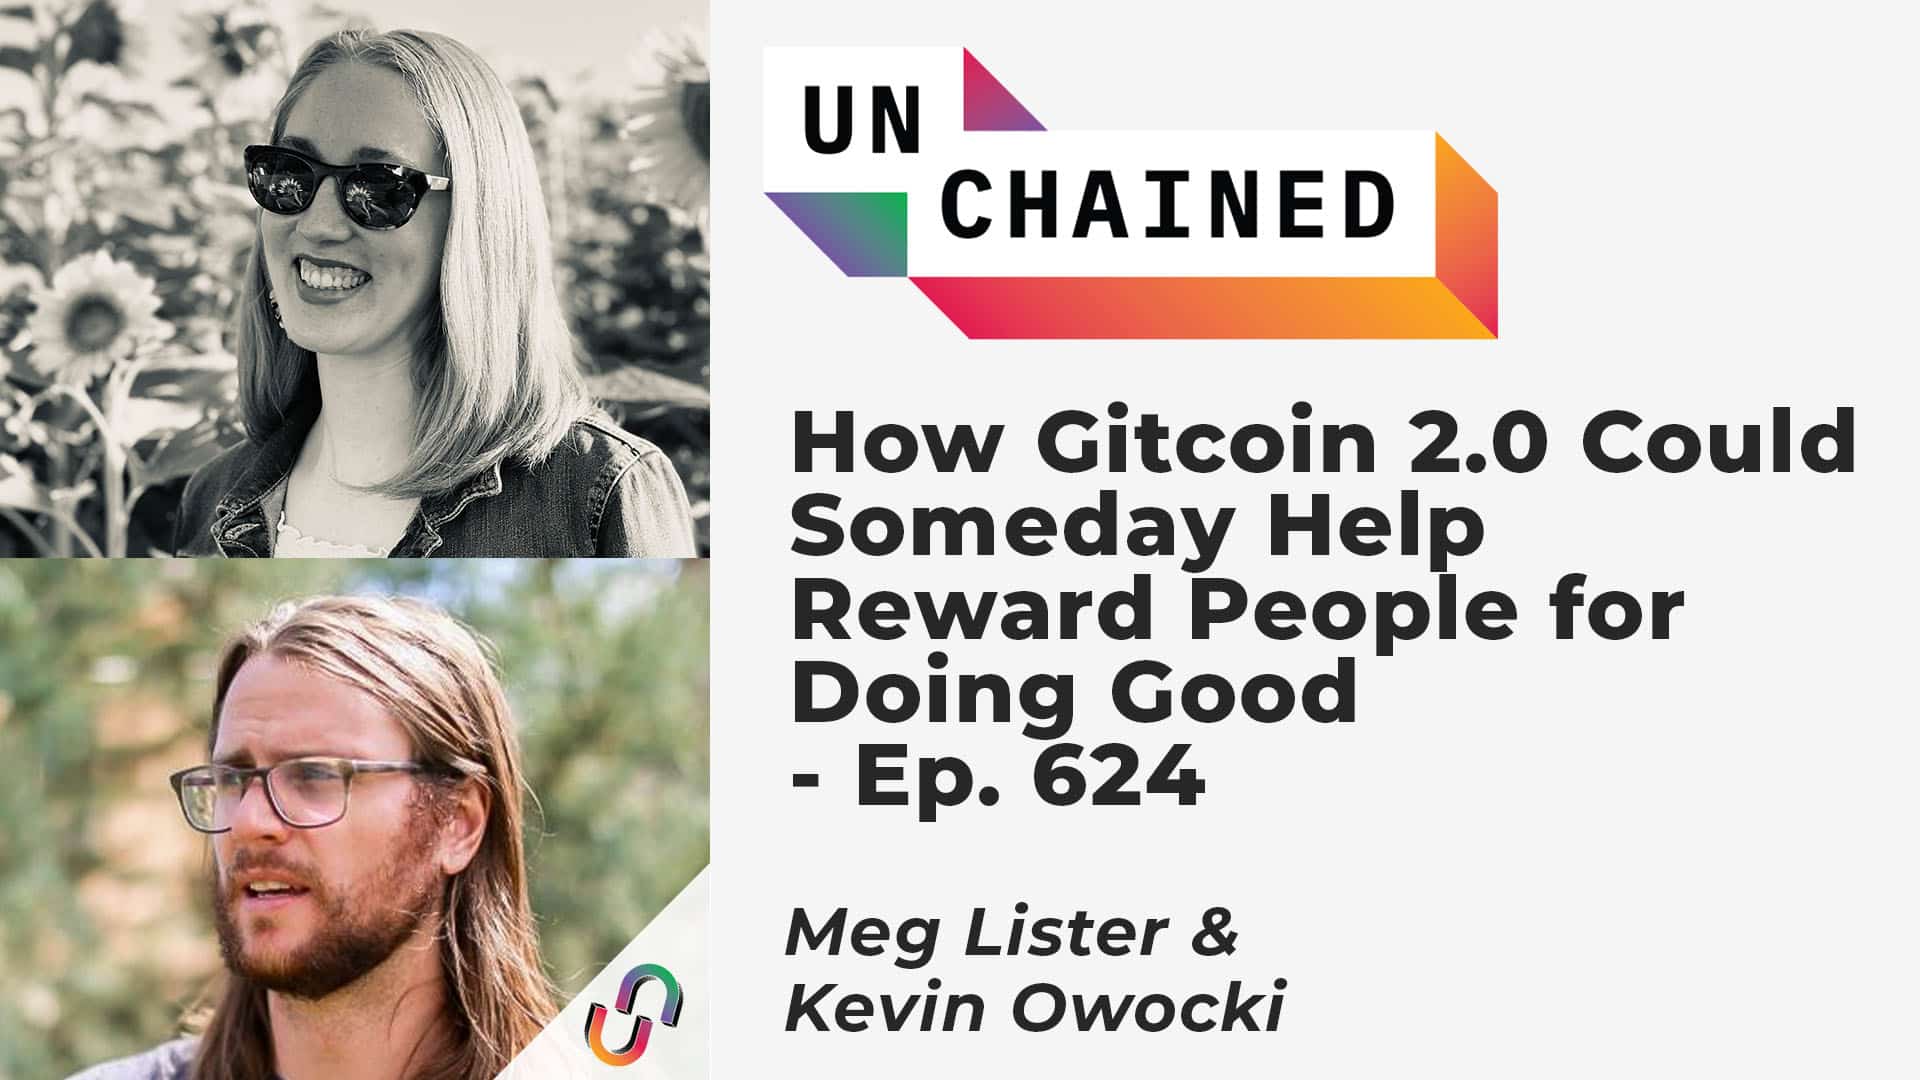 How Gitcoin 2.0 Could Someday Help Reward People for Doing Good - Ep. 624